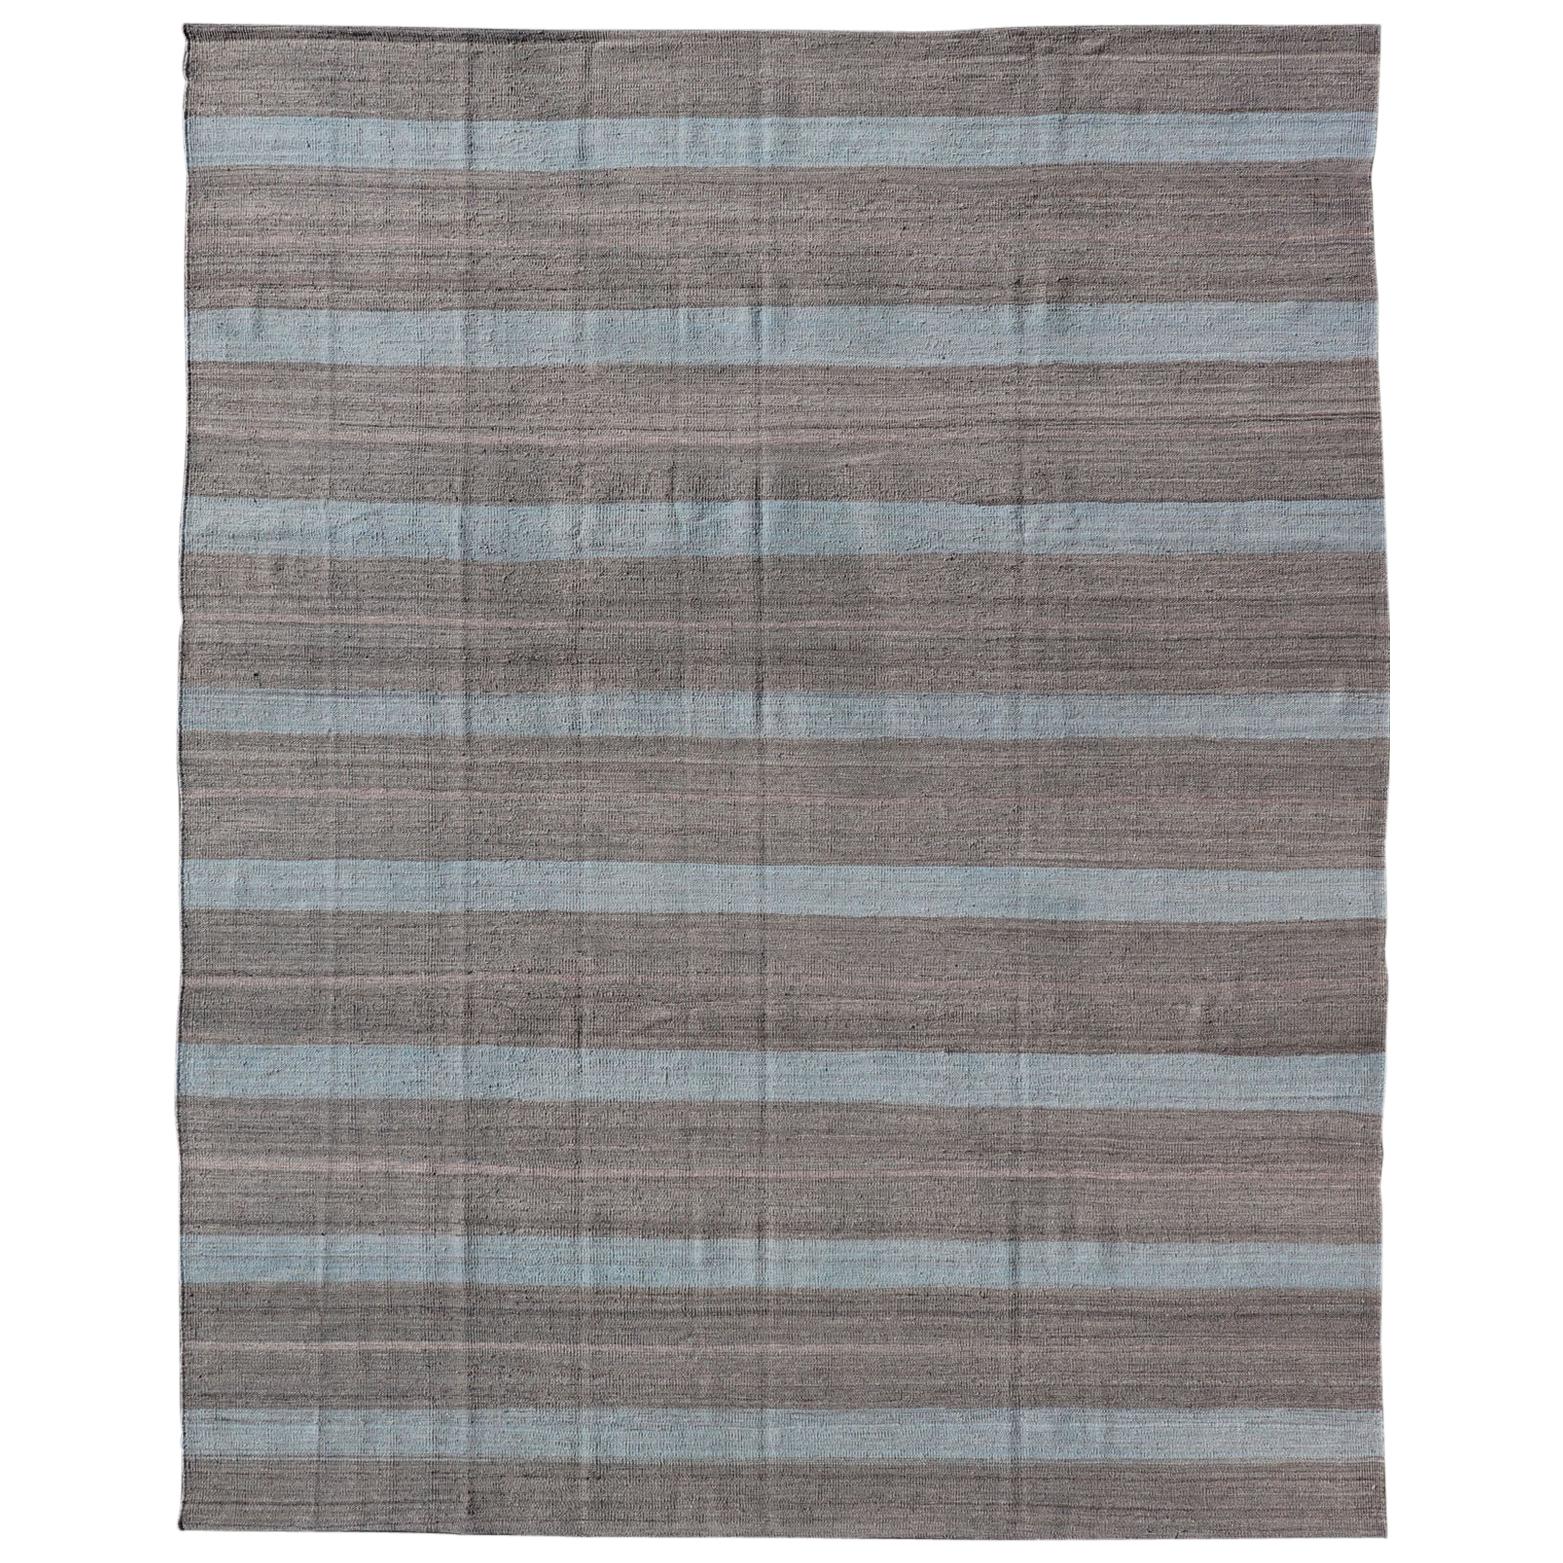 Modern Kilim Casual Rug with Stripes in Shades of Blue, Gray' and Charcoal